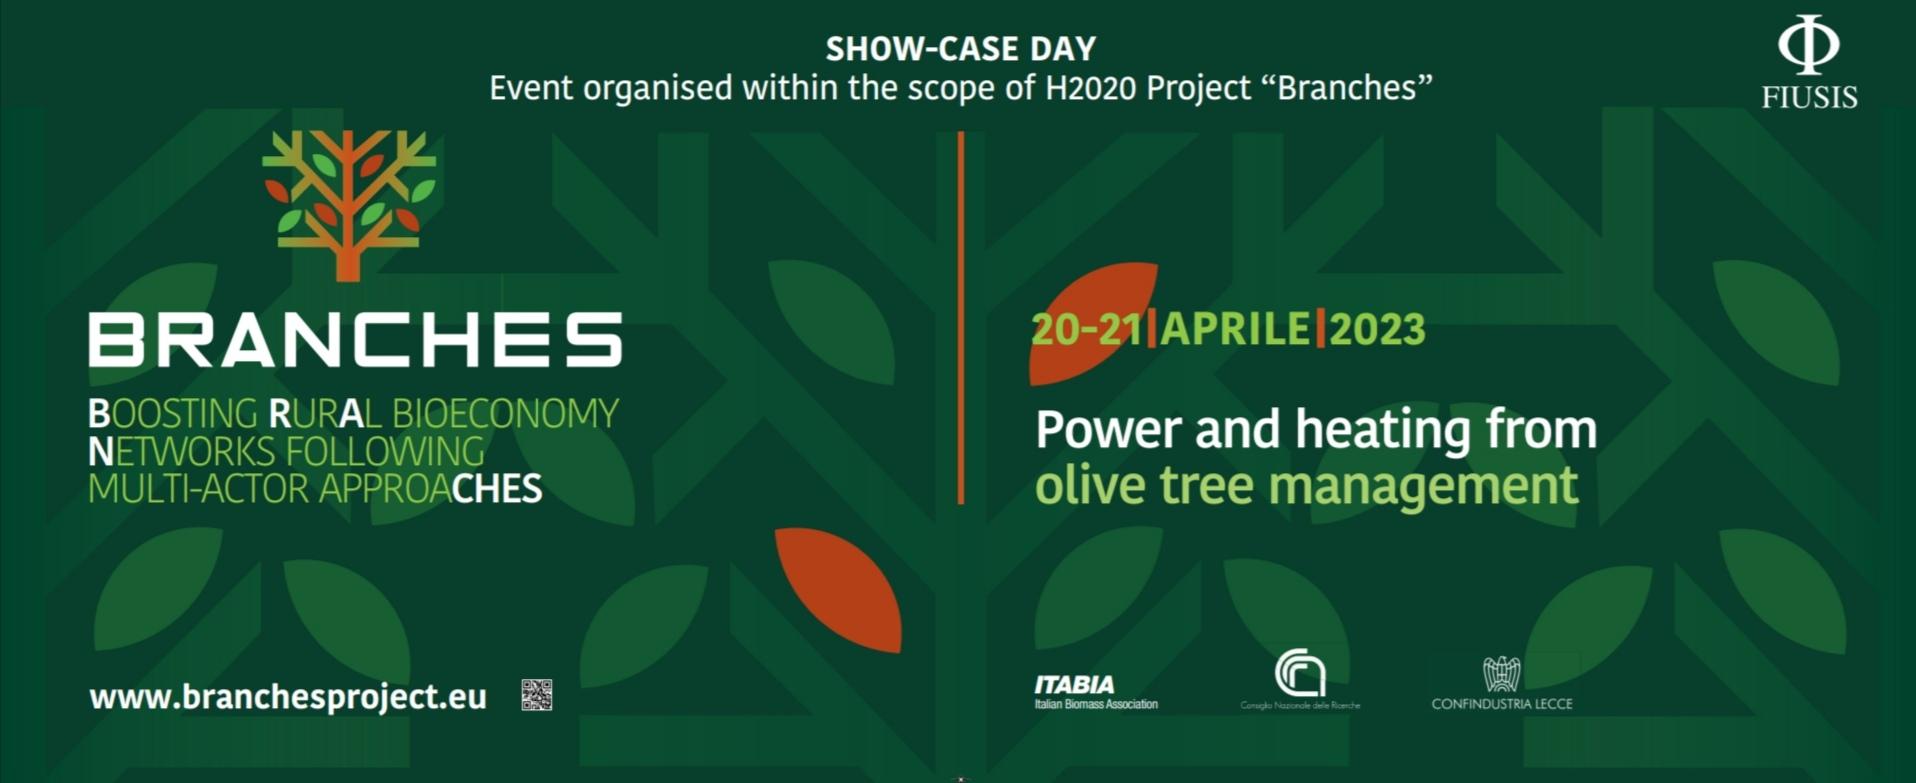 Here the FINAL PROGRAMME of the event: "POWER AND HEATING FROM OLIVE TREE PRUNING"